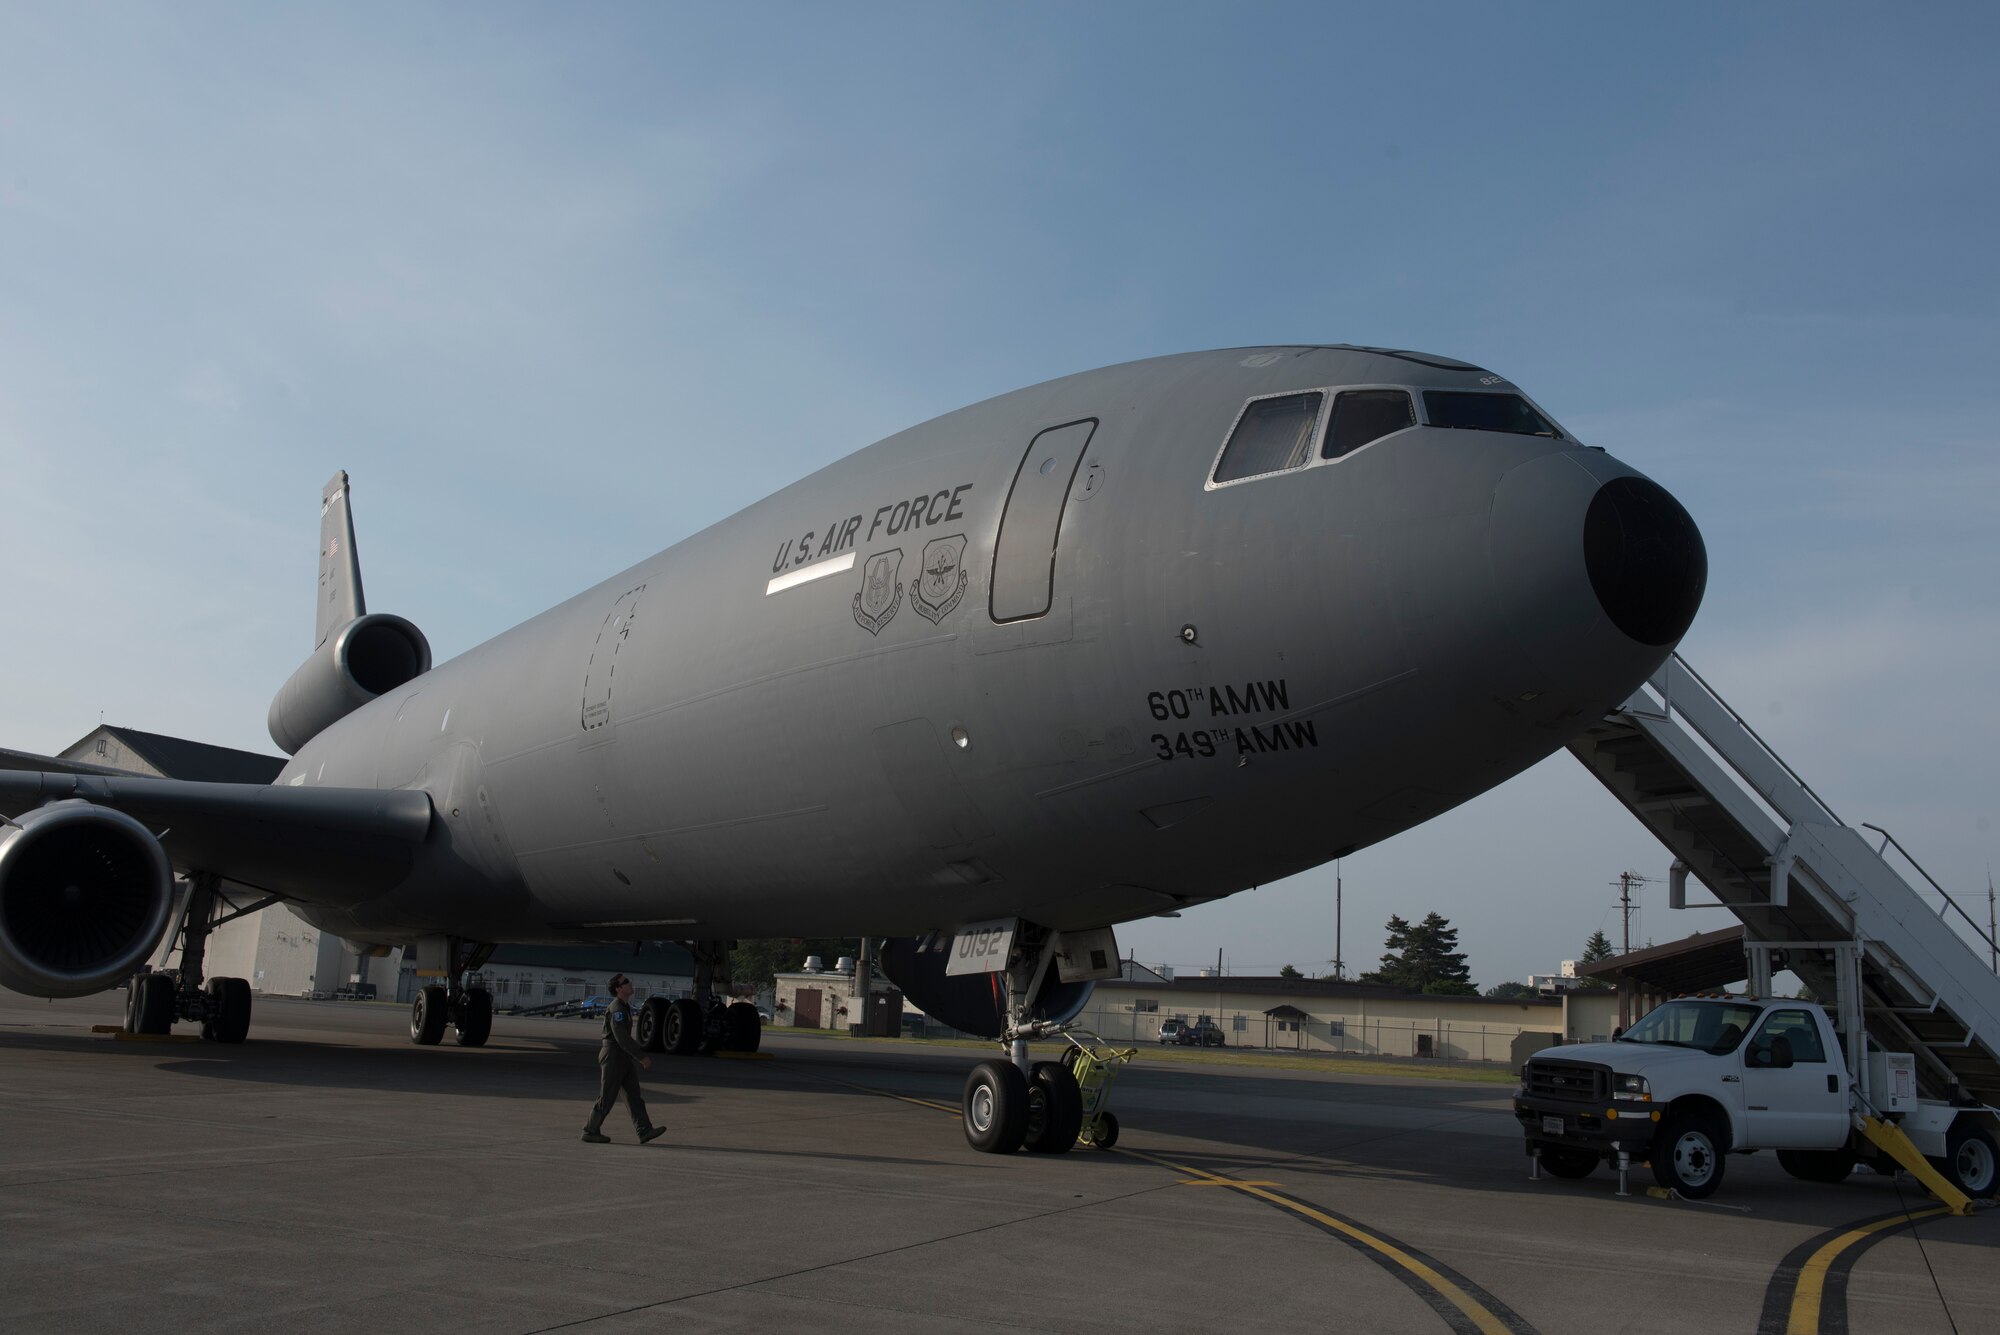 A KC-10 Extender assigned to the 60th Air Mobility Wing at Travis Air Force Base, Calif., undergoes pre-flight checks at Misawa Air Base, Japan, June 4, 2018. The aircraft supported refueling support missions in the Pacific theater. (U.S. Air Force photo by Tech. Sgt. James Hodgman)